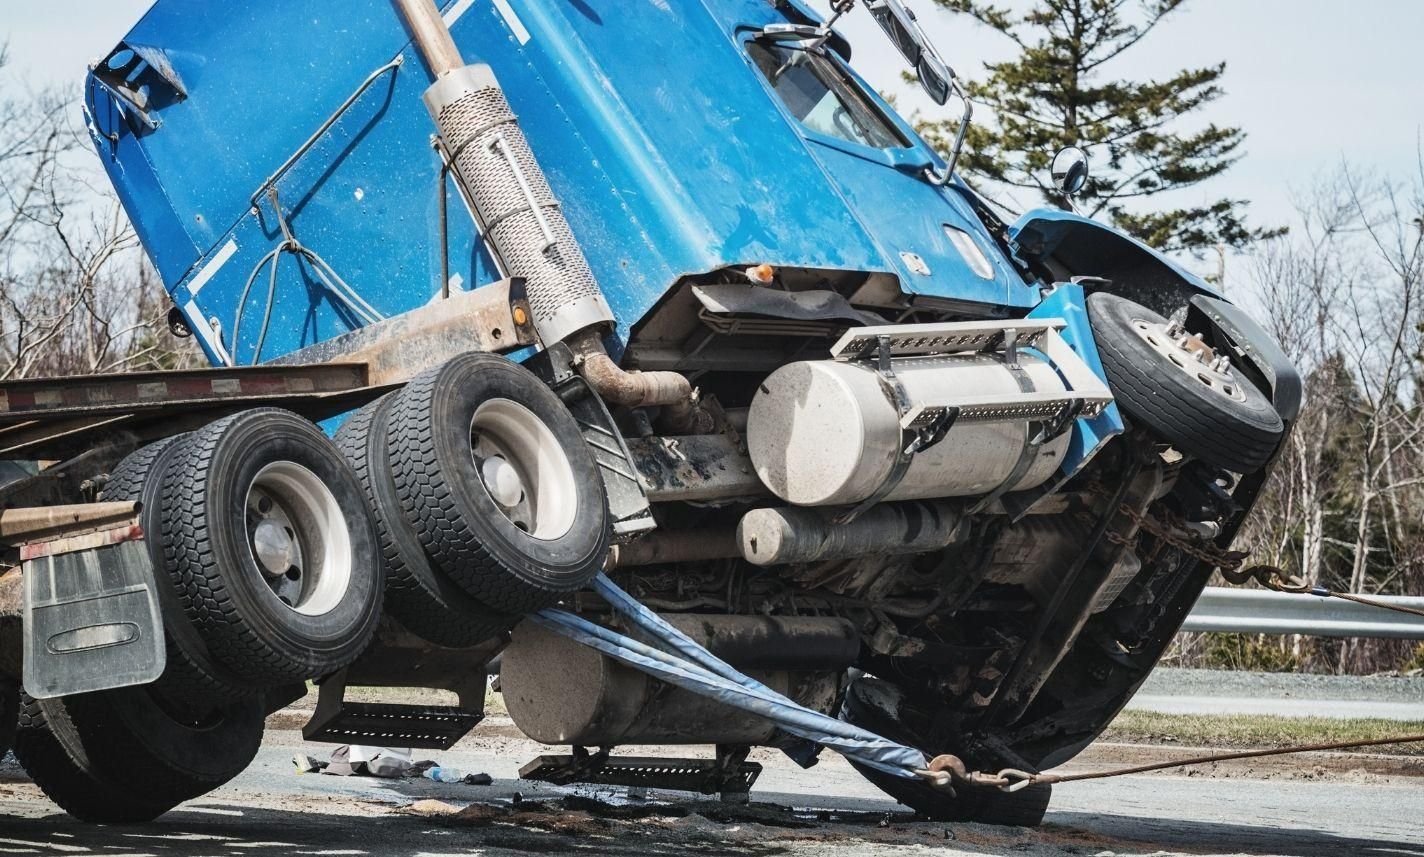 sardis-commercial-truck-accident-injury-lawyer